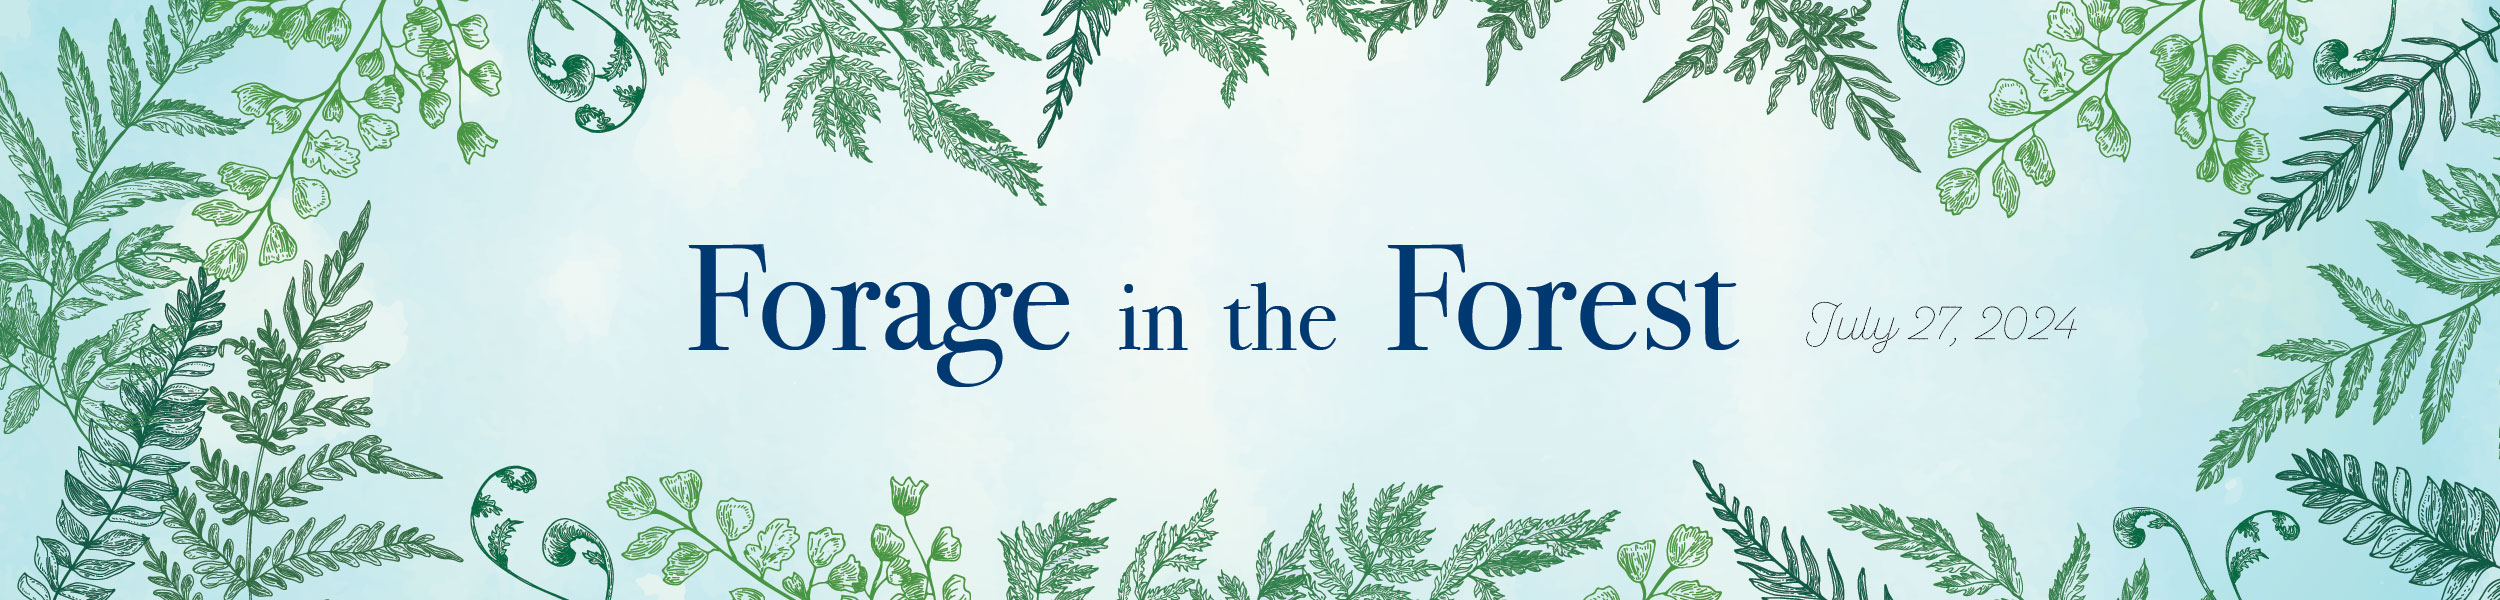 Forage in the Forest